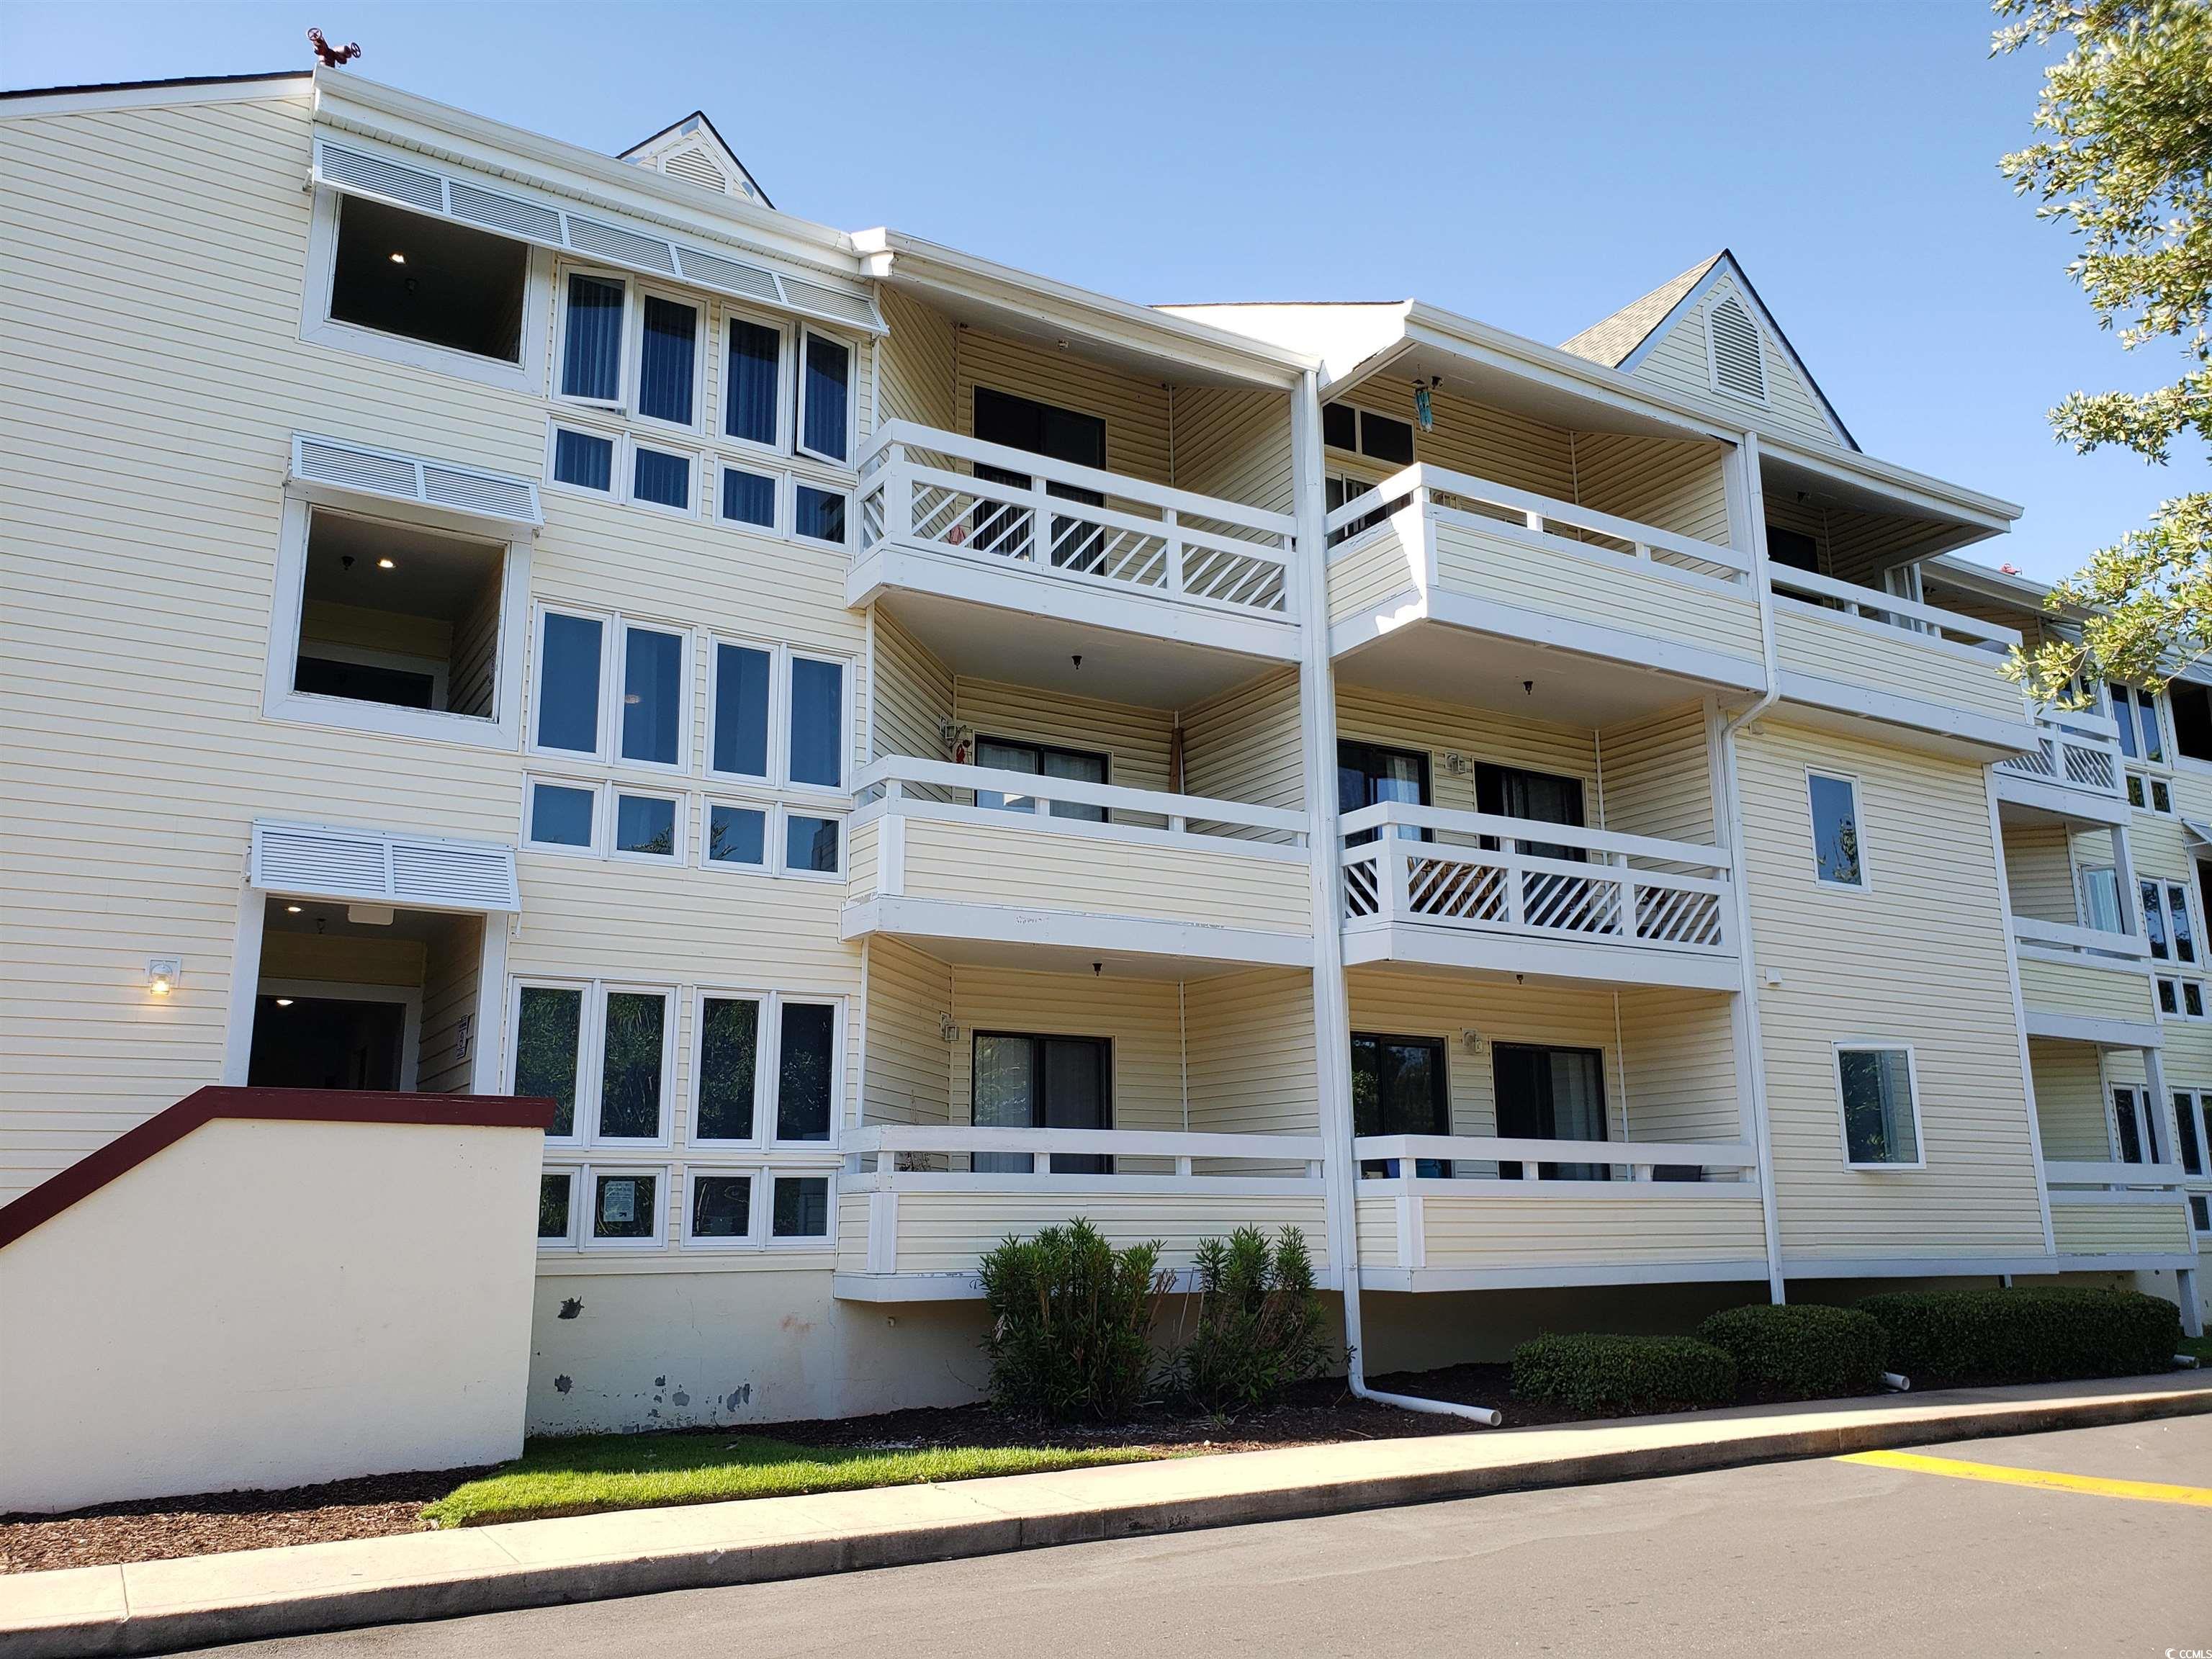 furnished, 2-level, top-floor loft-style condo 3/4 mi. from ocean, 3/4 mi. from intracoastal waterway, 80 yards from north myrtle beach community ctr. balcony overlooks central park. pool right behind building. new heat & air unit 6/23. condo has dishwasher. new in 2016: stainless steel stove, frig & microwave; water heater; carpet in bedroom & on steps; tile floor & vanity in bathroom; kitchen countertops & cabinets. walk to beachwood golf course & 12 restaurants. central park has tennis courts, softball fields, pickleball courts, basketball hoops & more. community ctr. has exercise rooms, 2 gyms & pickleball. krave bagel & krispy kreme 2 blocks away. no short-term renting. tenant would like to stay. main street 14 blocks north. barefoot landing 5 min. south; broadway at the beach 20 min. south.